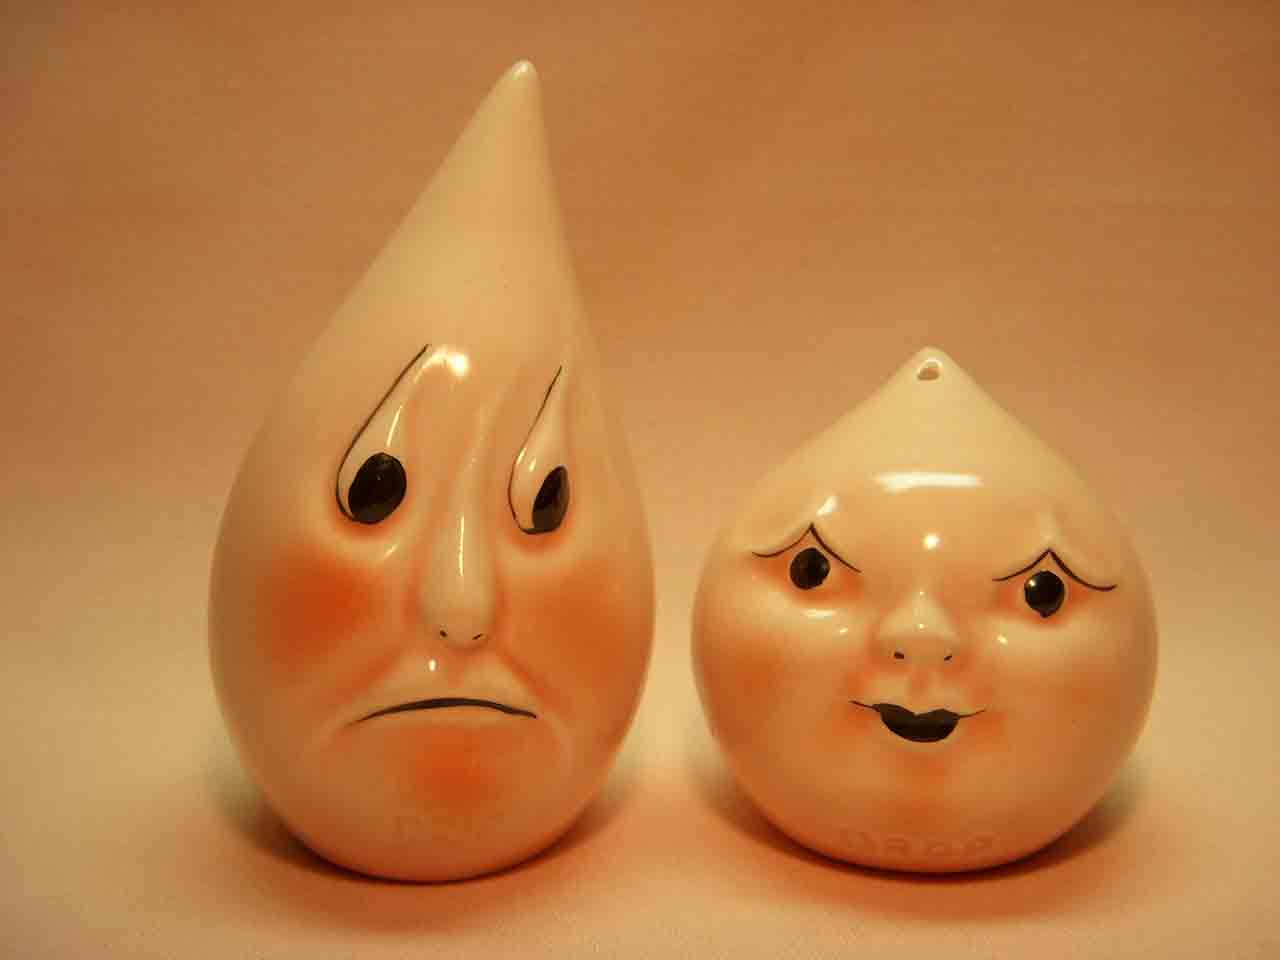 Vallona Starr Drip and Drop salt and pepper shakers